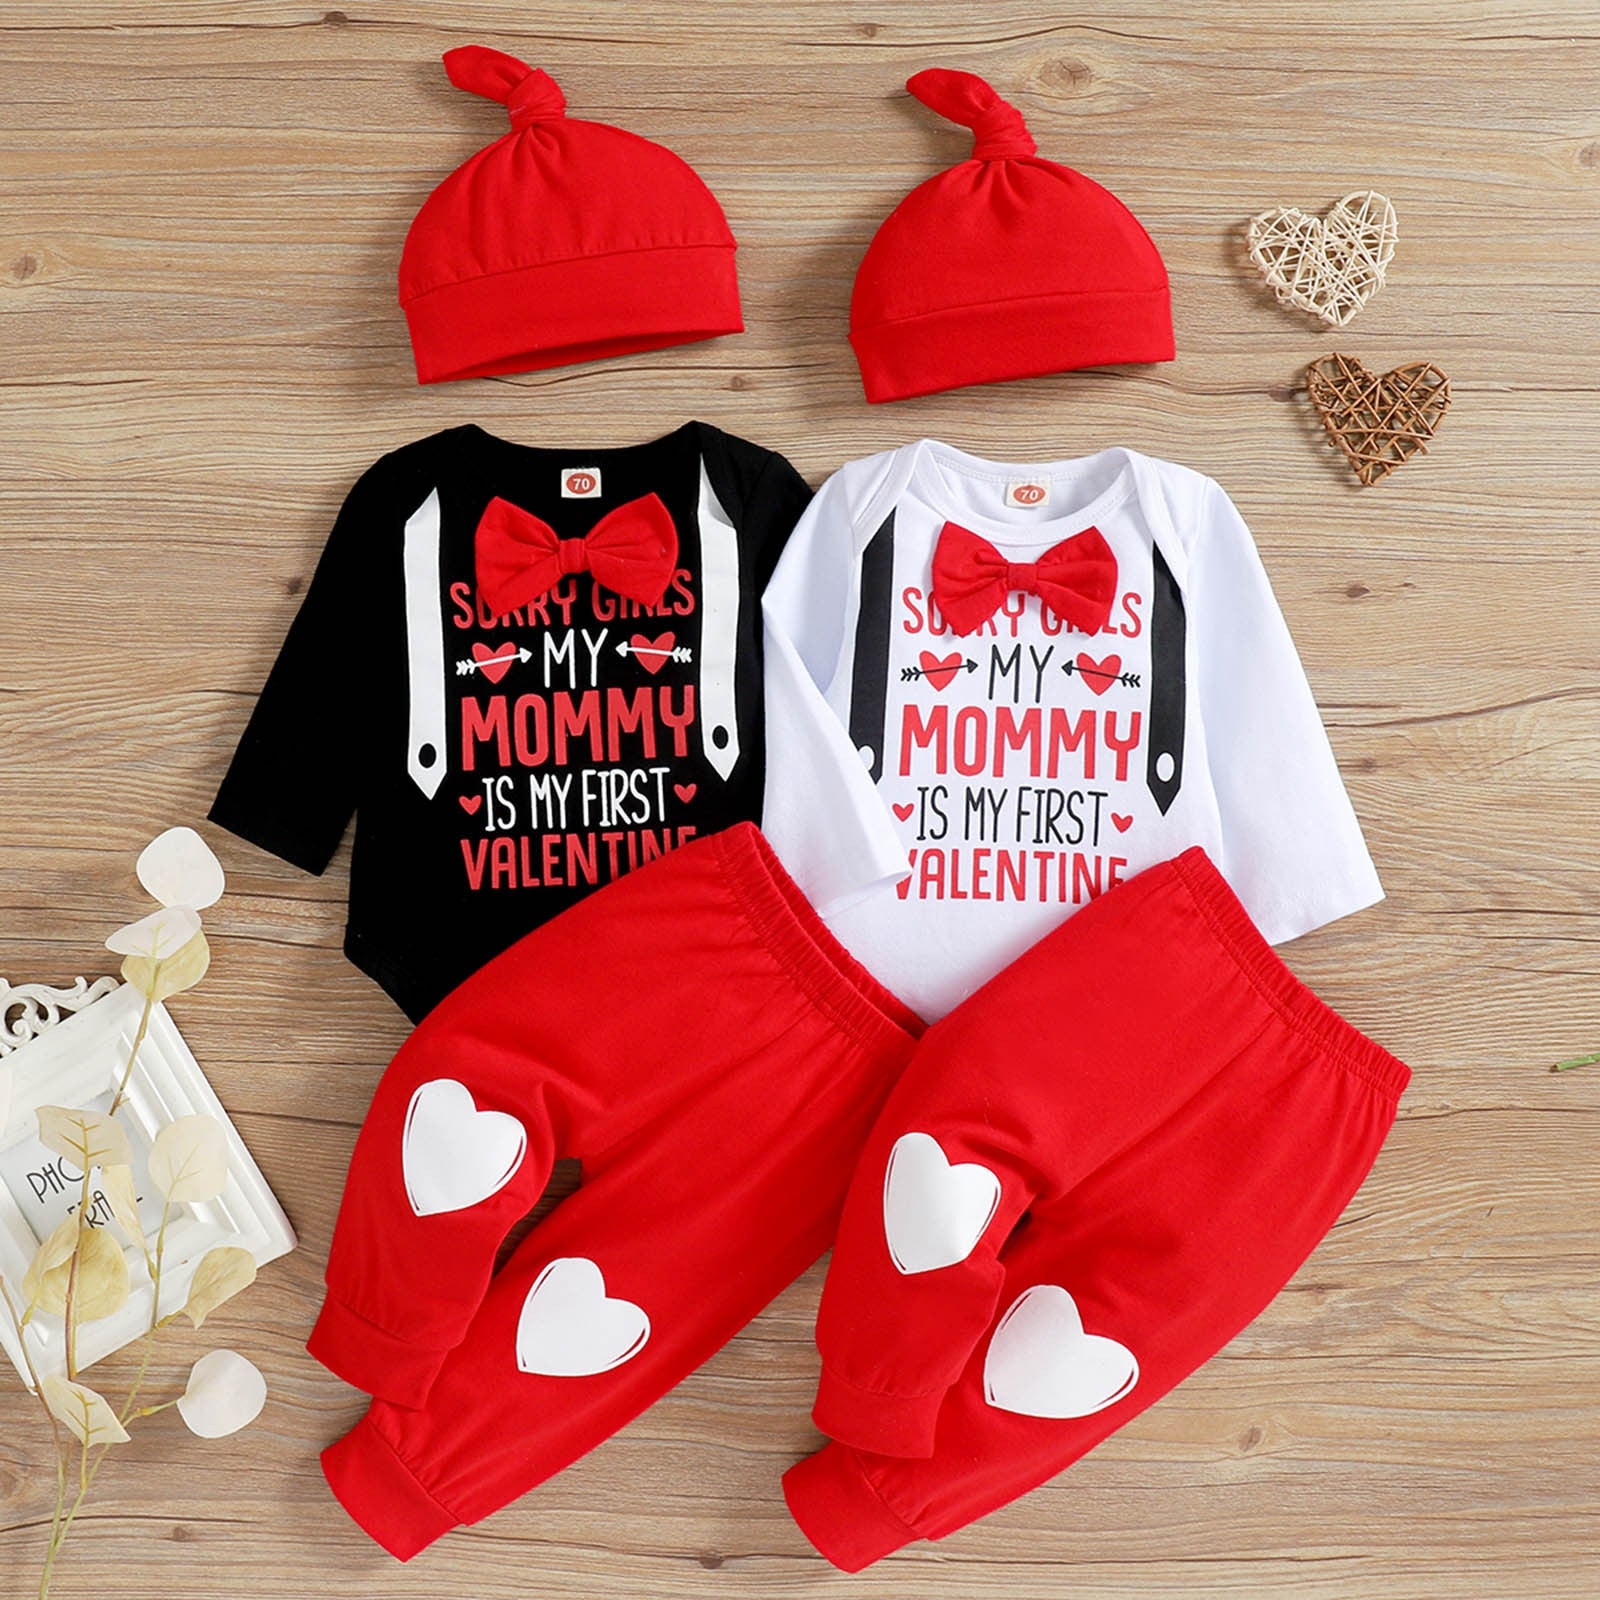 Adorable Newborn Infant Baby Boys Clothes Sets for Valentine's Day Outfits